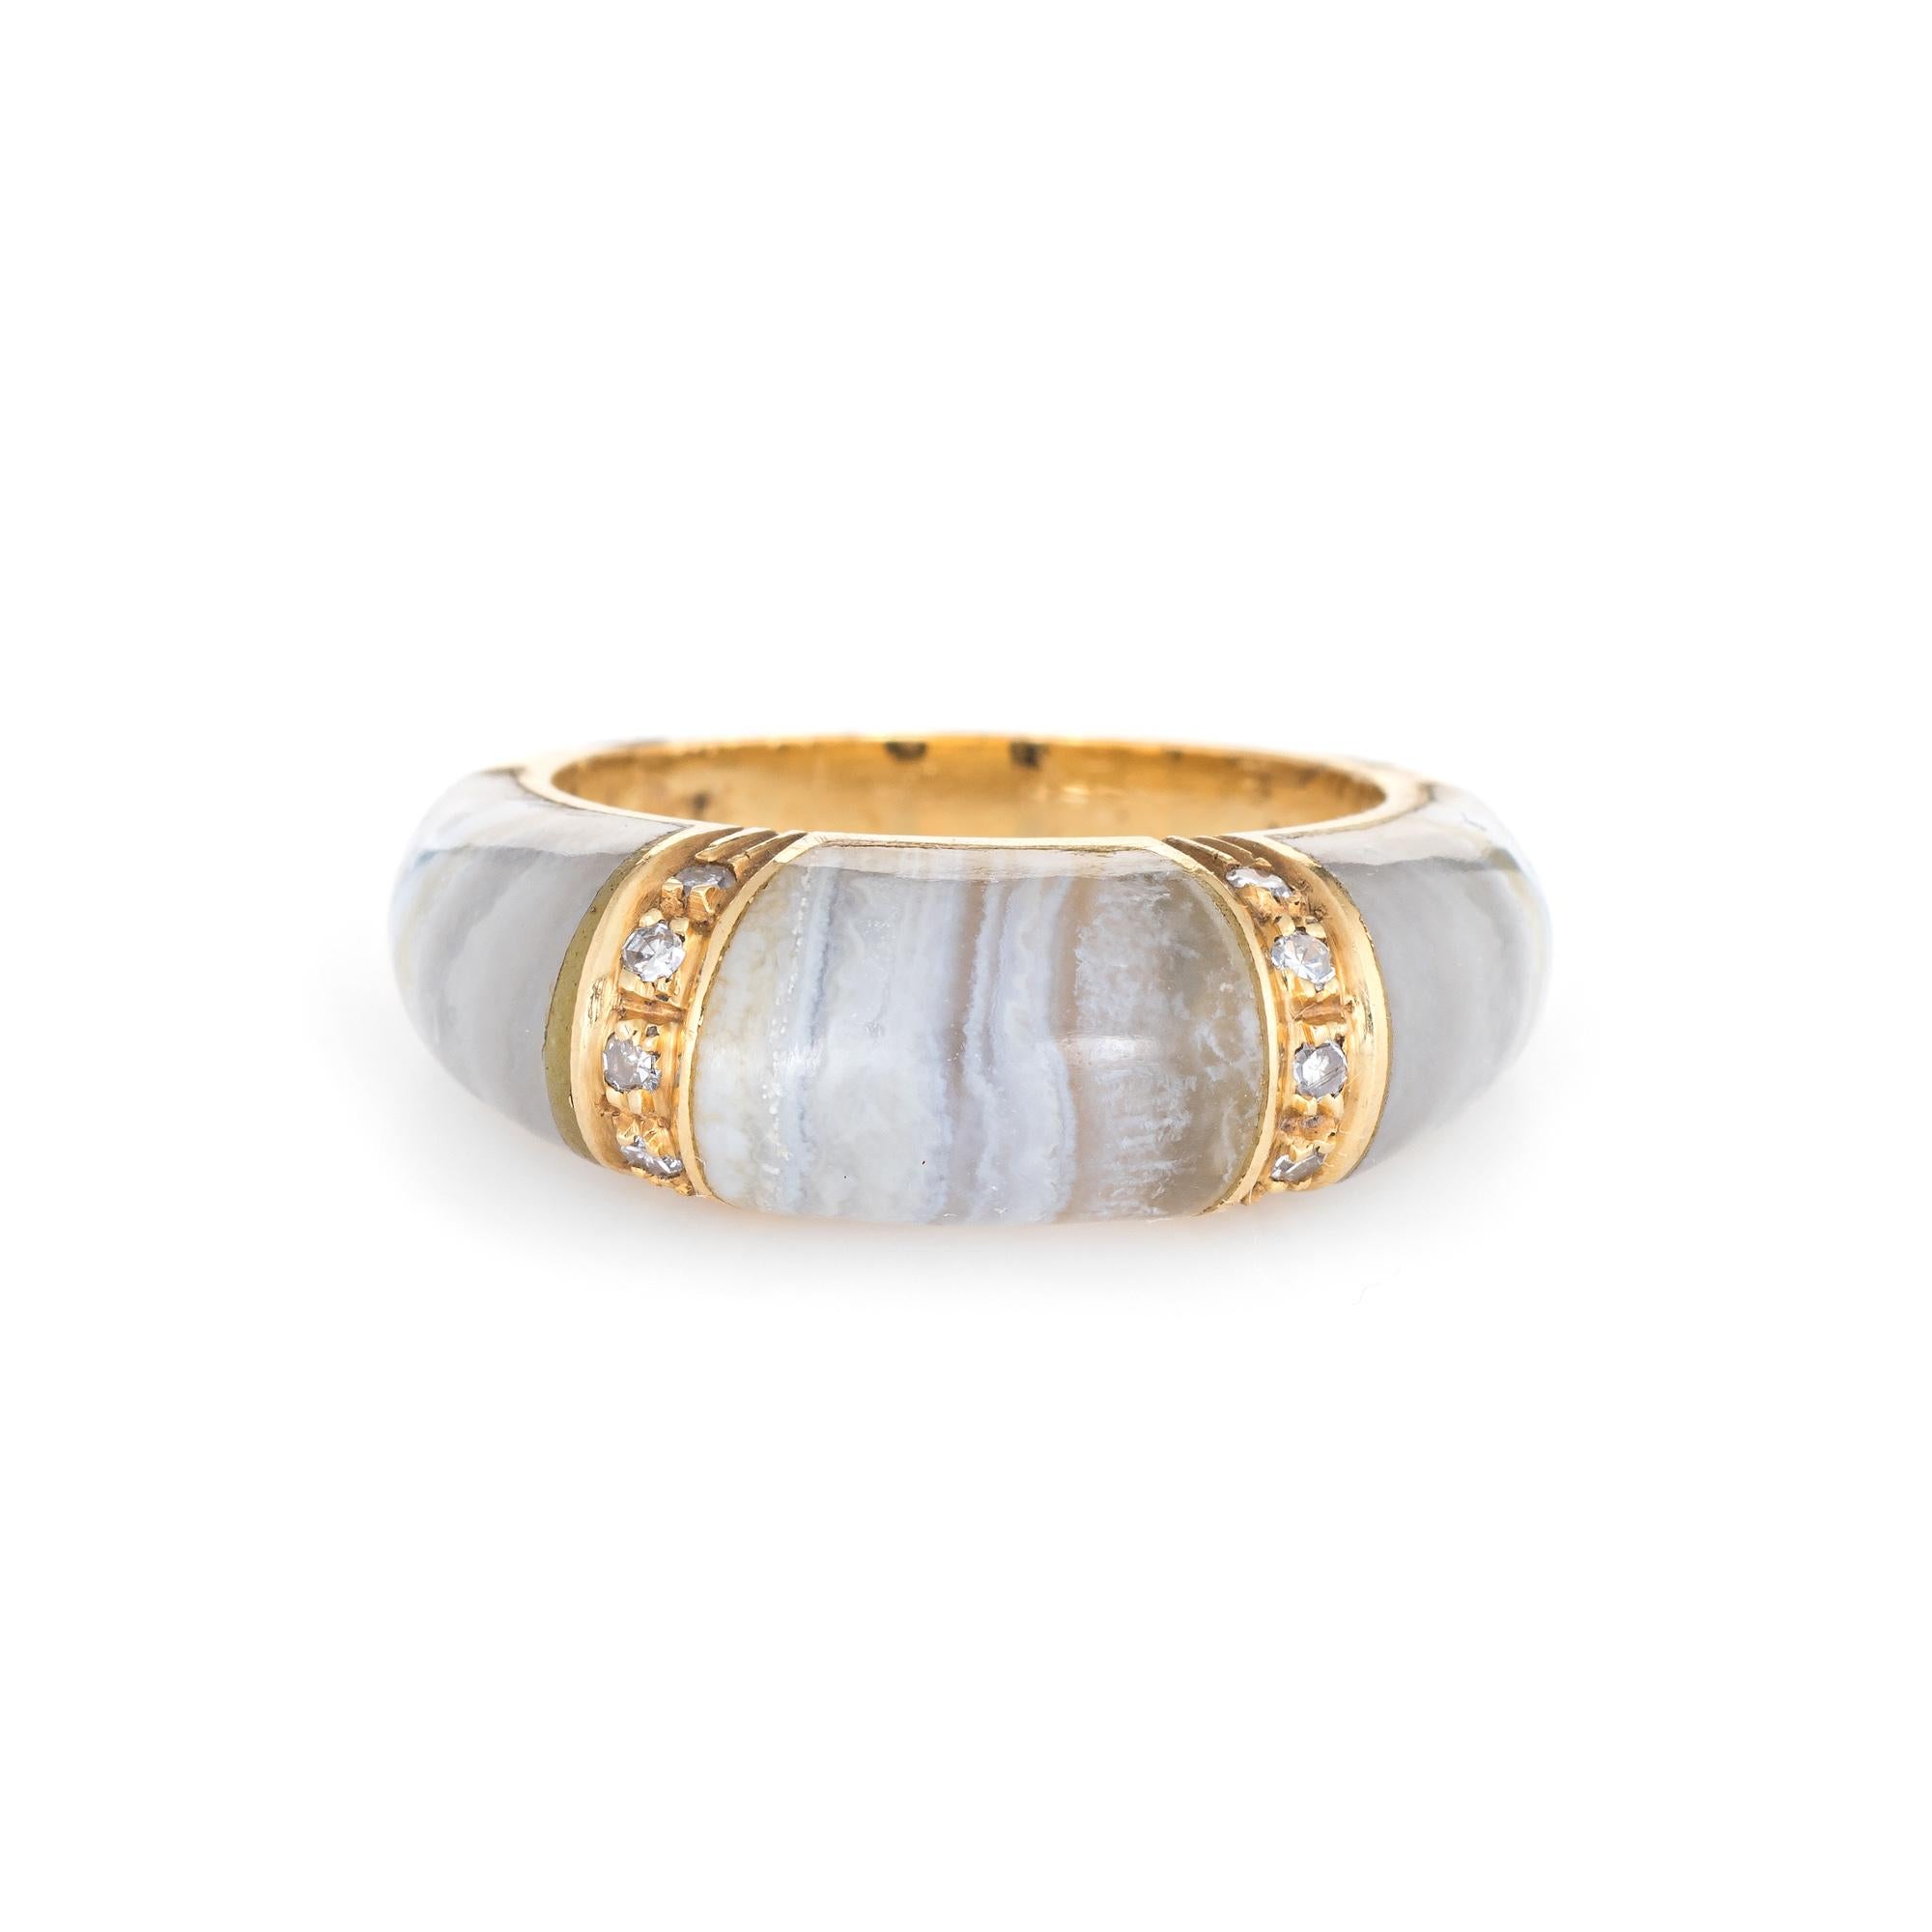 Stylish vintage banded agate & diamond ring (circa 1970s) crafted in 18 karat yellow gold. 

Banded agate measures from 6mm to 7mm. 10 estimated 0.01 carat single cut diamonds total an estimated 0.10 carats (estimated at H-I color and VS2-SI1